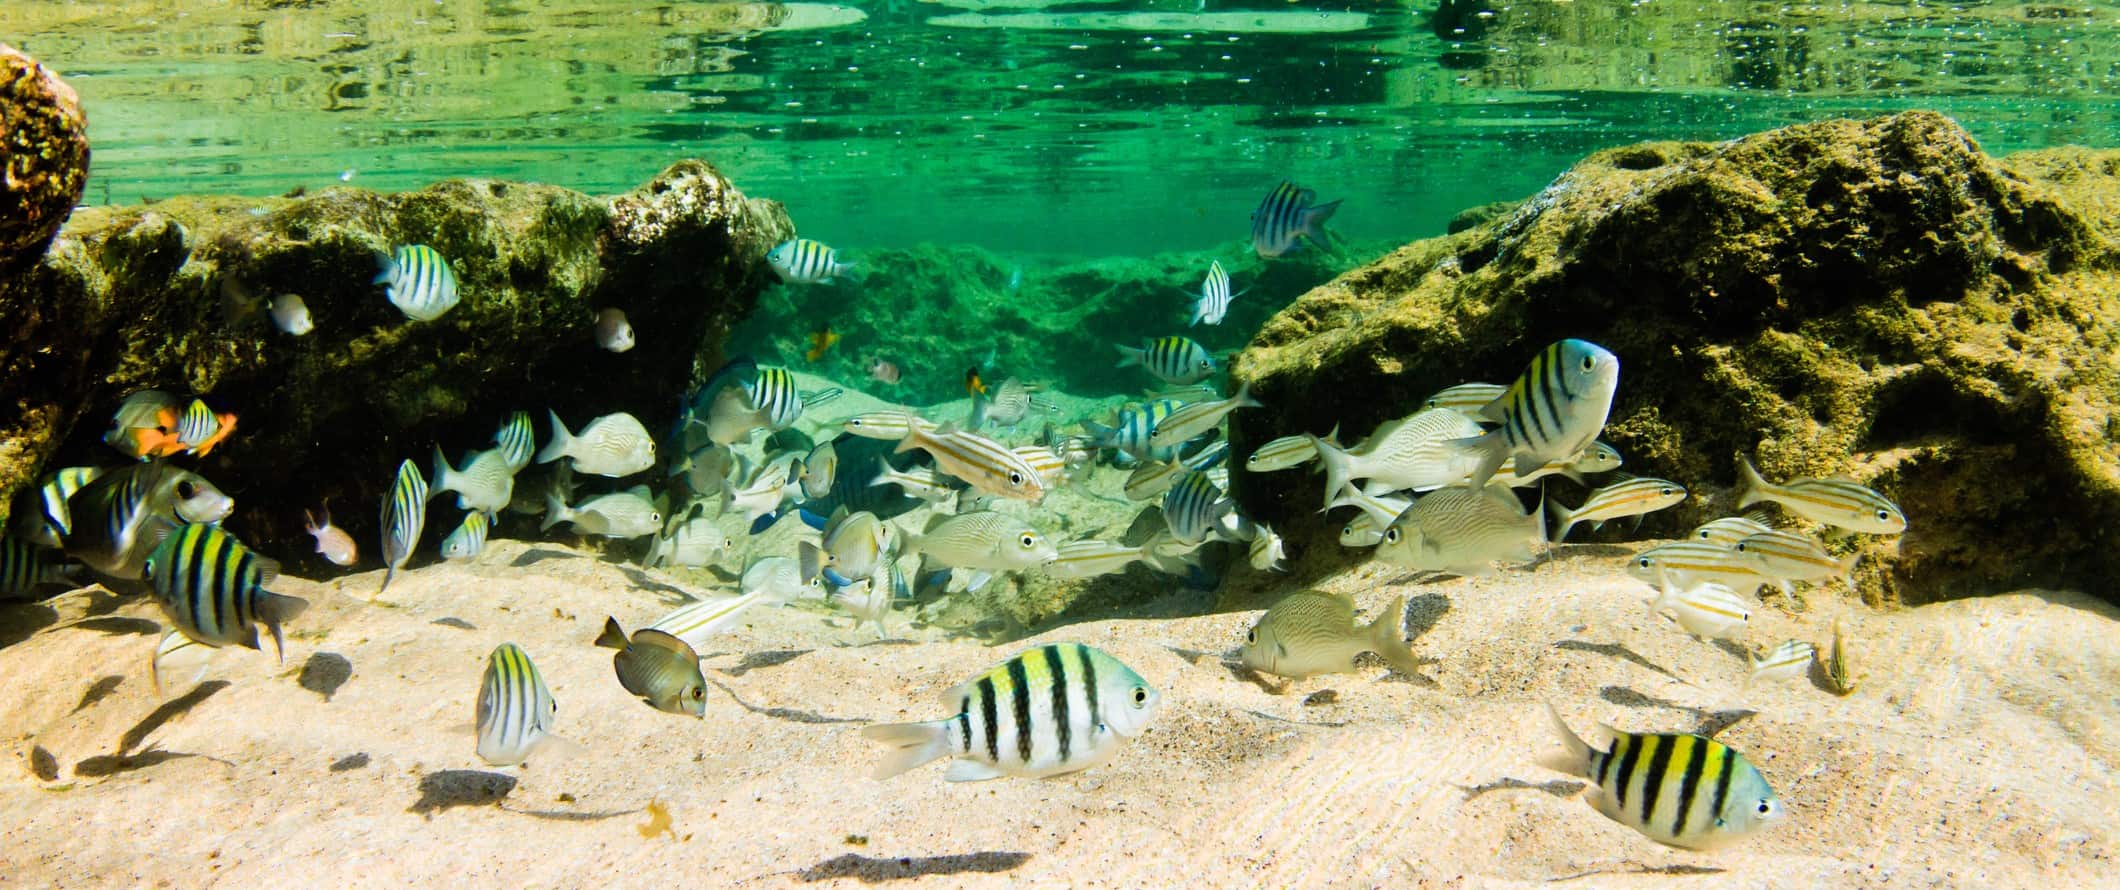 Tropical fish swimming in the clear waters of Fernando de Noronha, Brazil